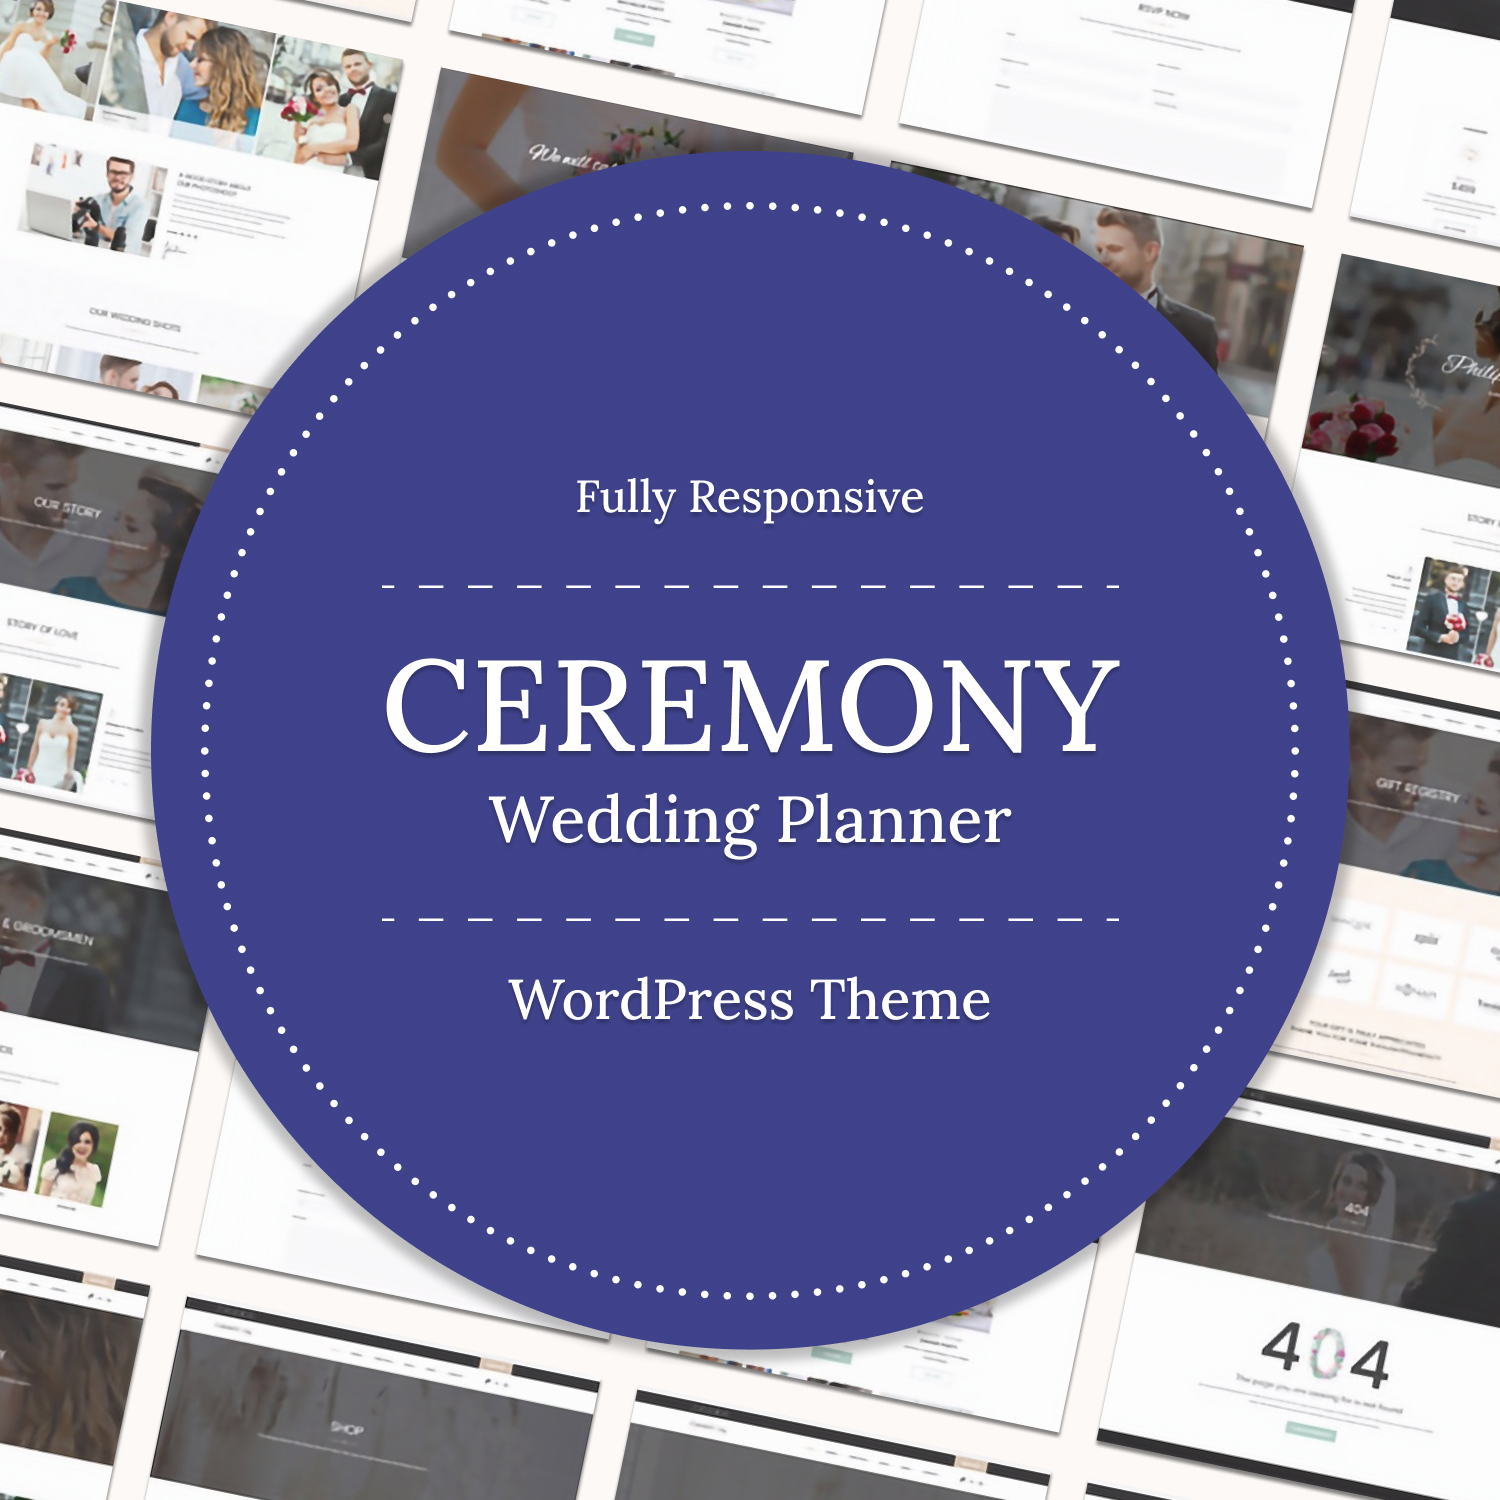 Images preview ceremony wedding planner wordpress theme.